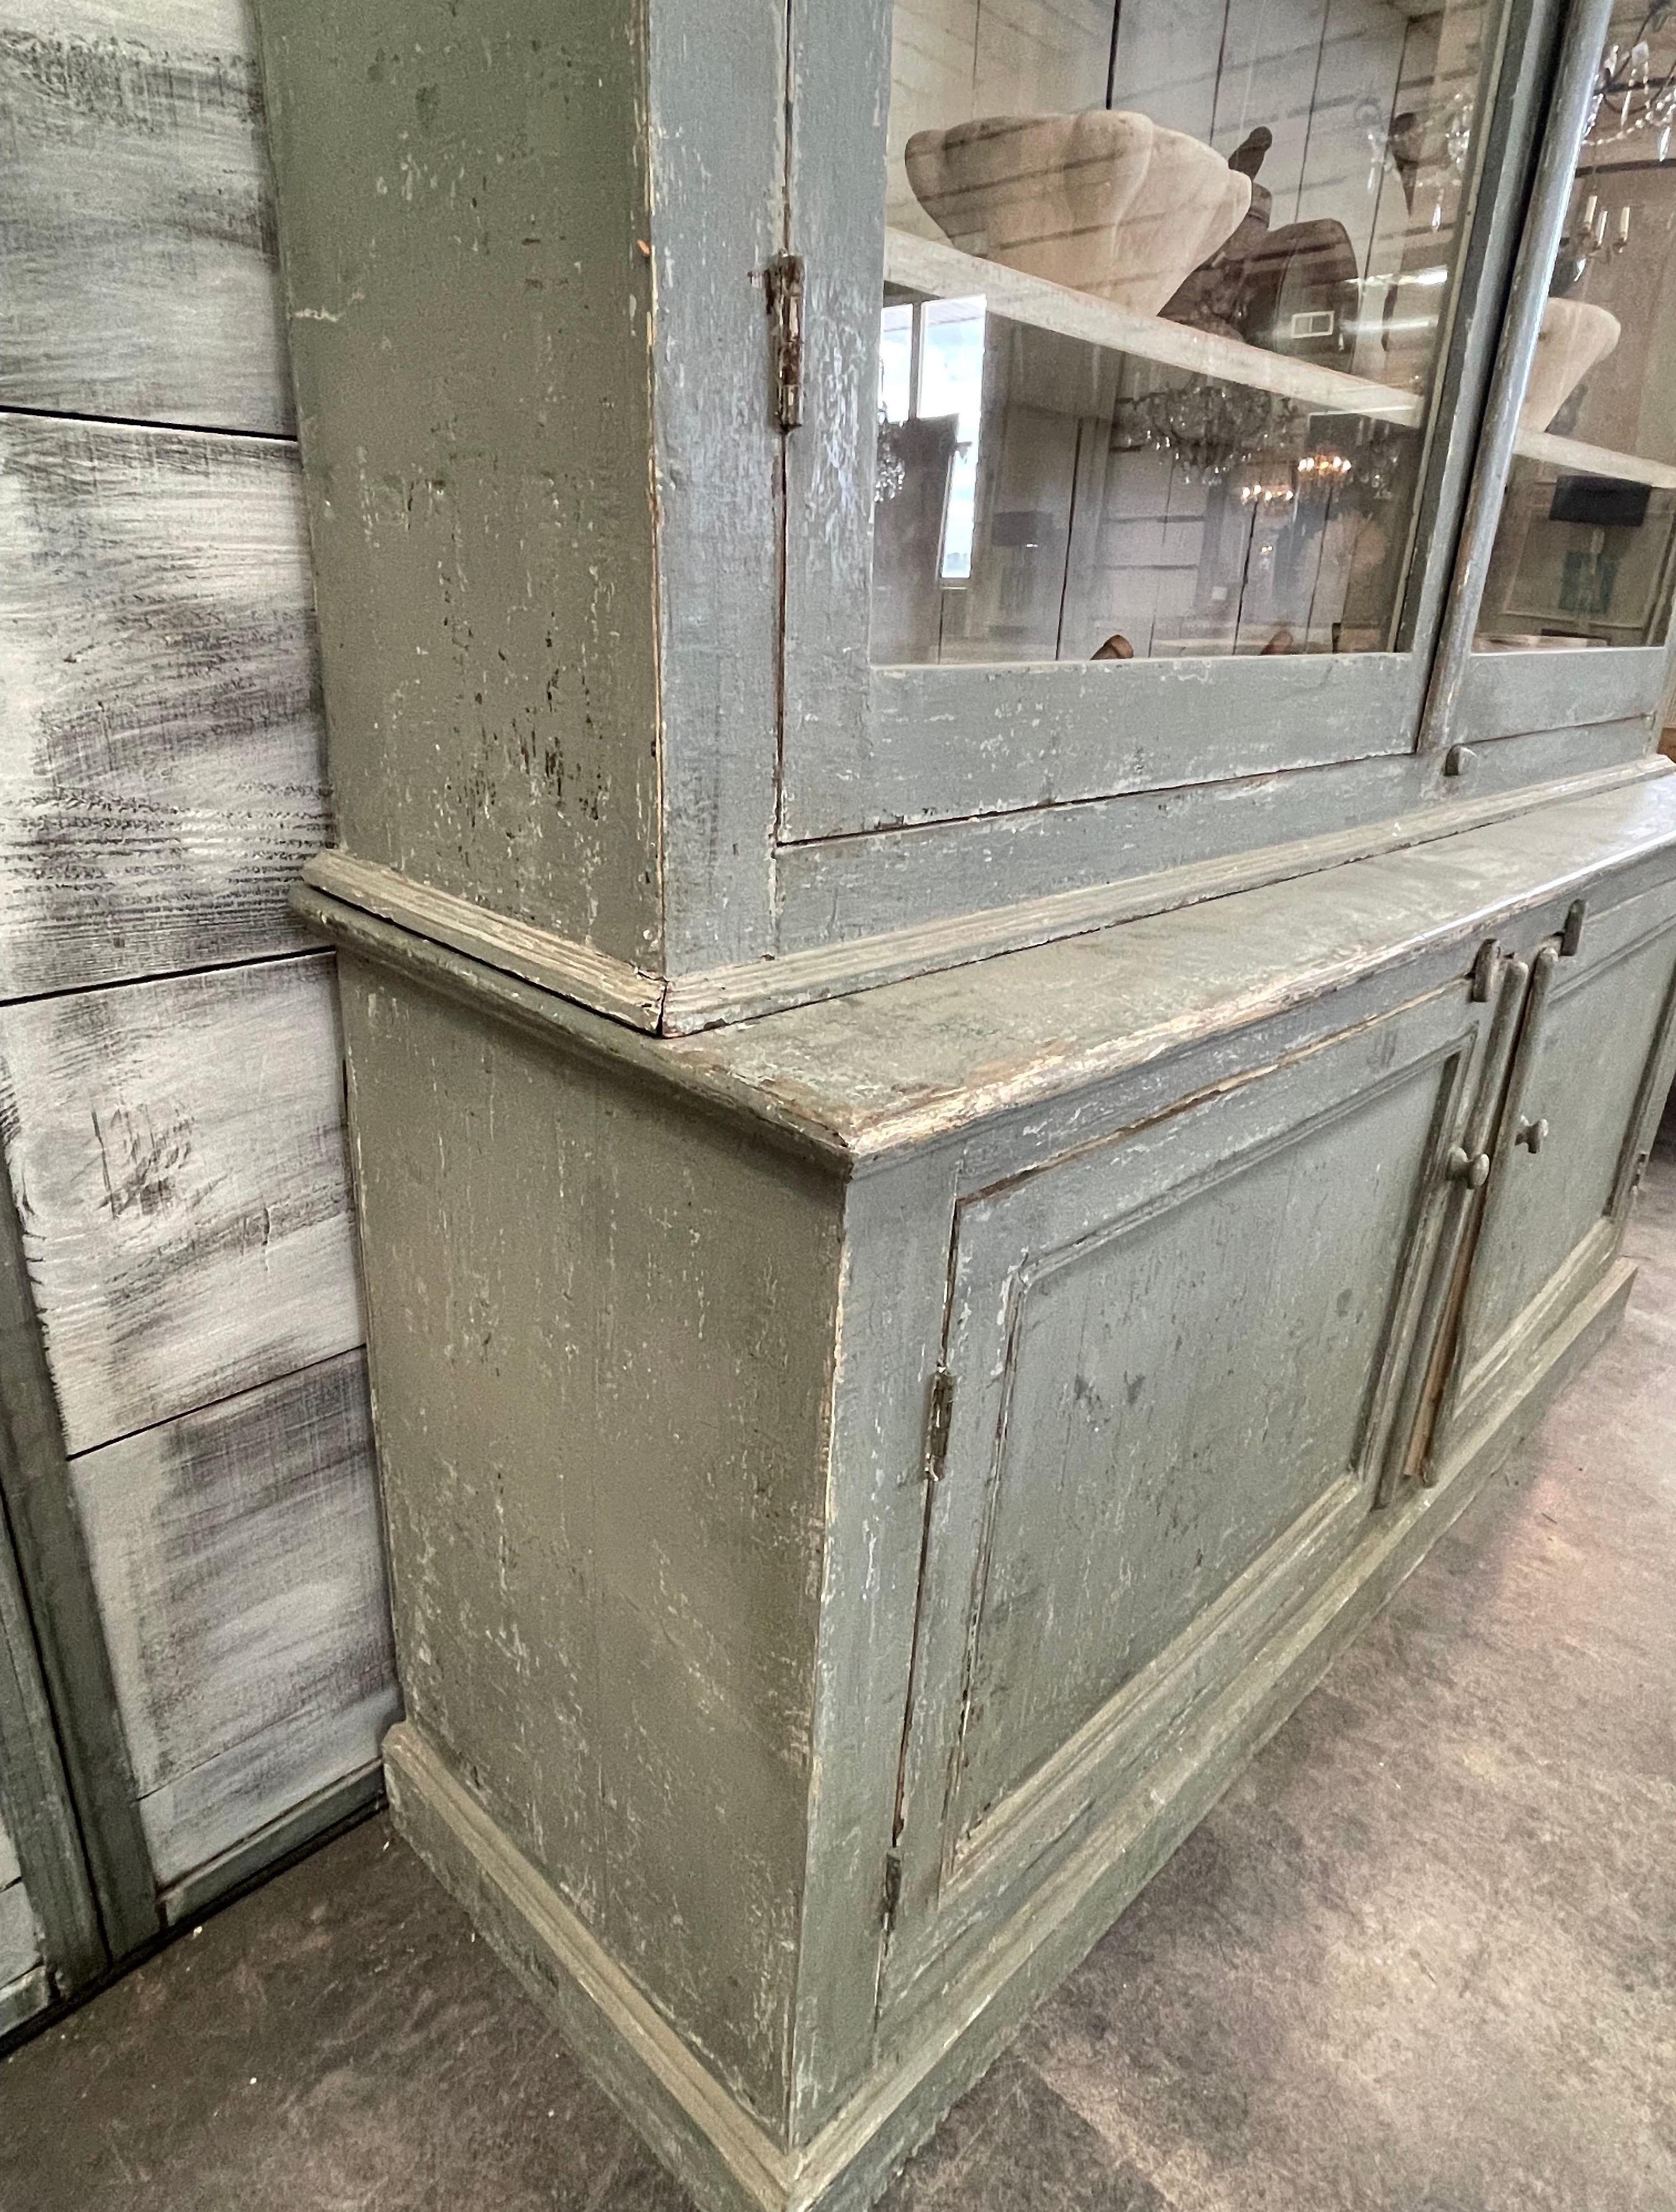 This is a beautiful sage green Pharmacy cabinet from the 19th c that has completely repainted to this beautiful color over its original dark reddish brown. It’s originally from Portugal and has simple clean lines. The crown does have some damage